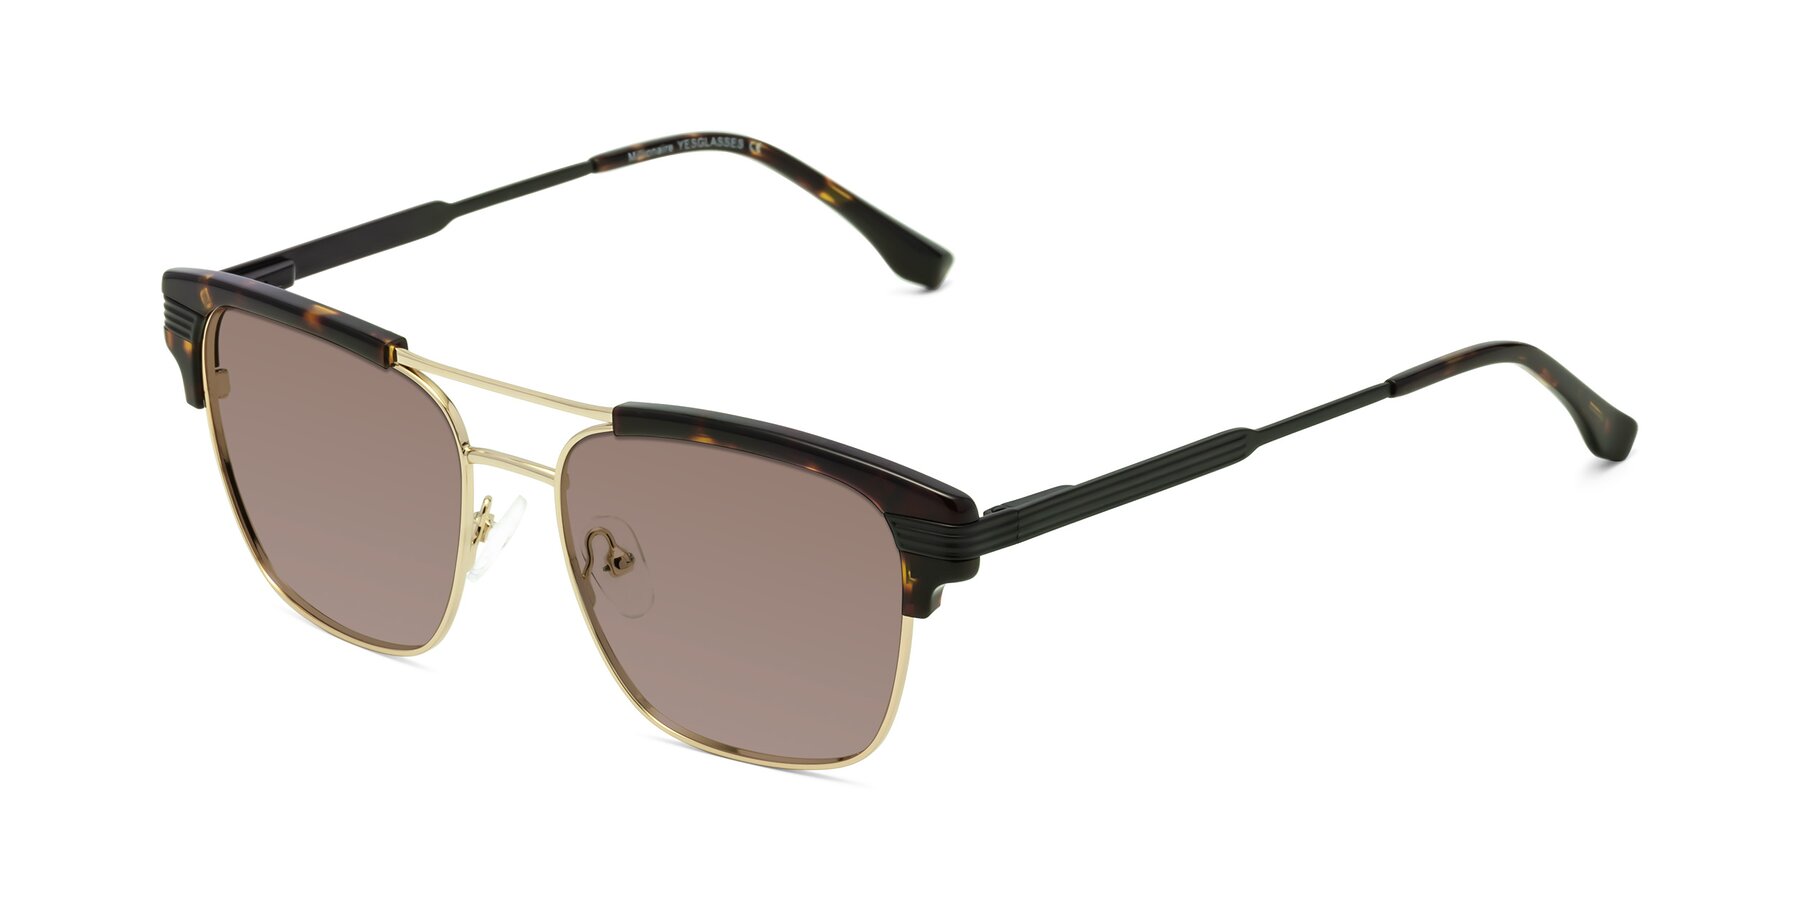 Angle of Millionaire in Tortoise-Gold with Medium Brown Tinted Lenses